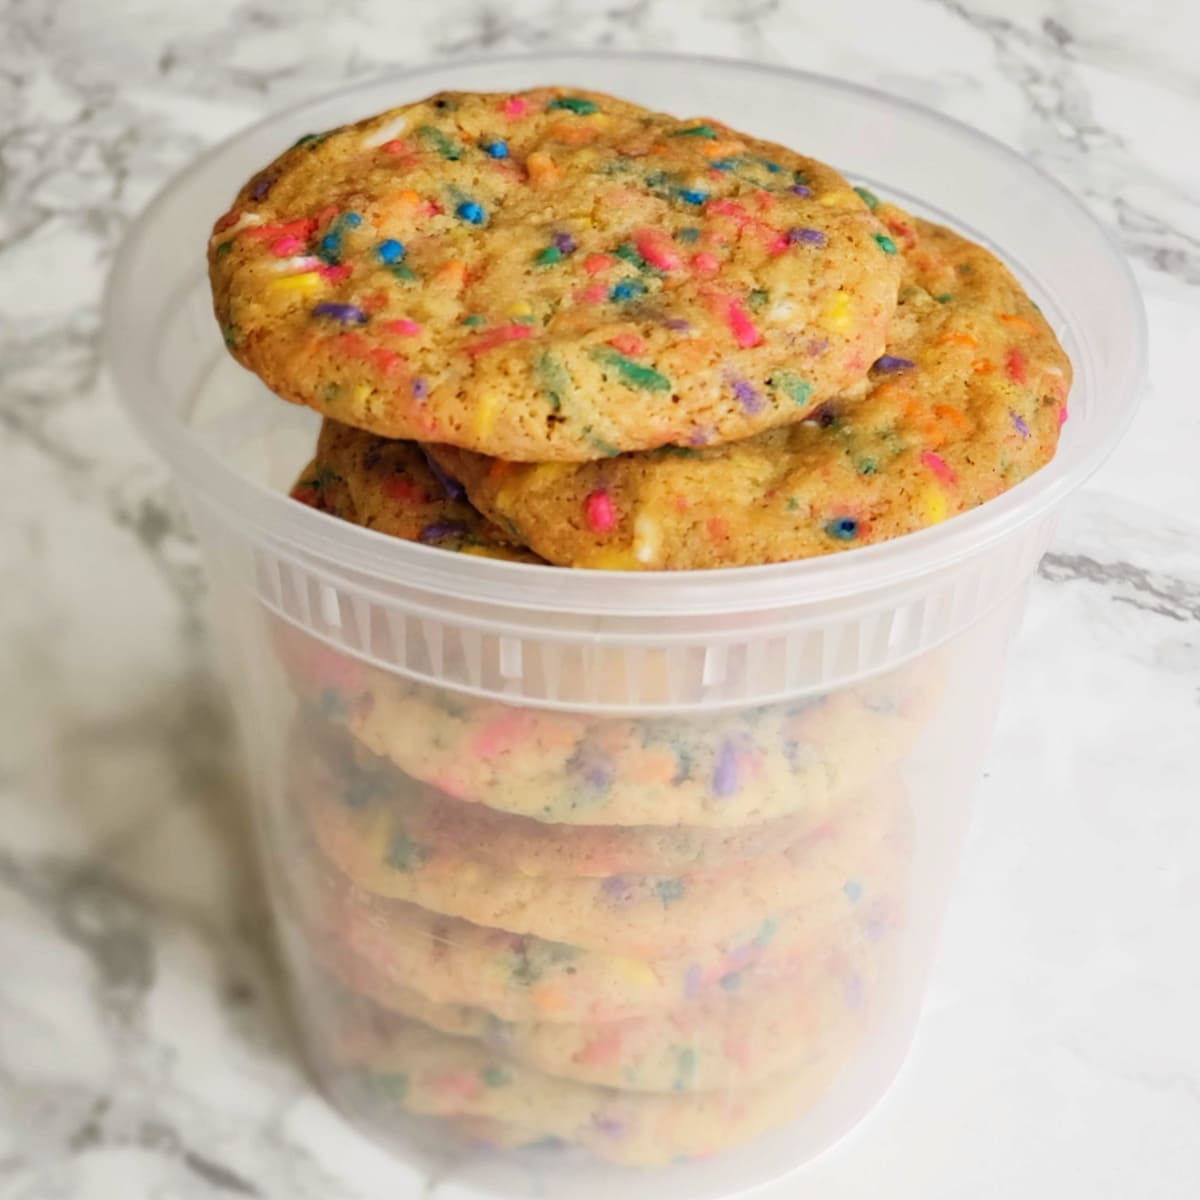 Cookies packed into a takeout container sitting on a white marble counter